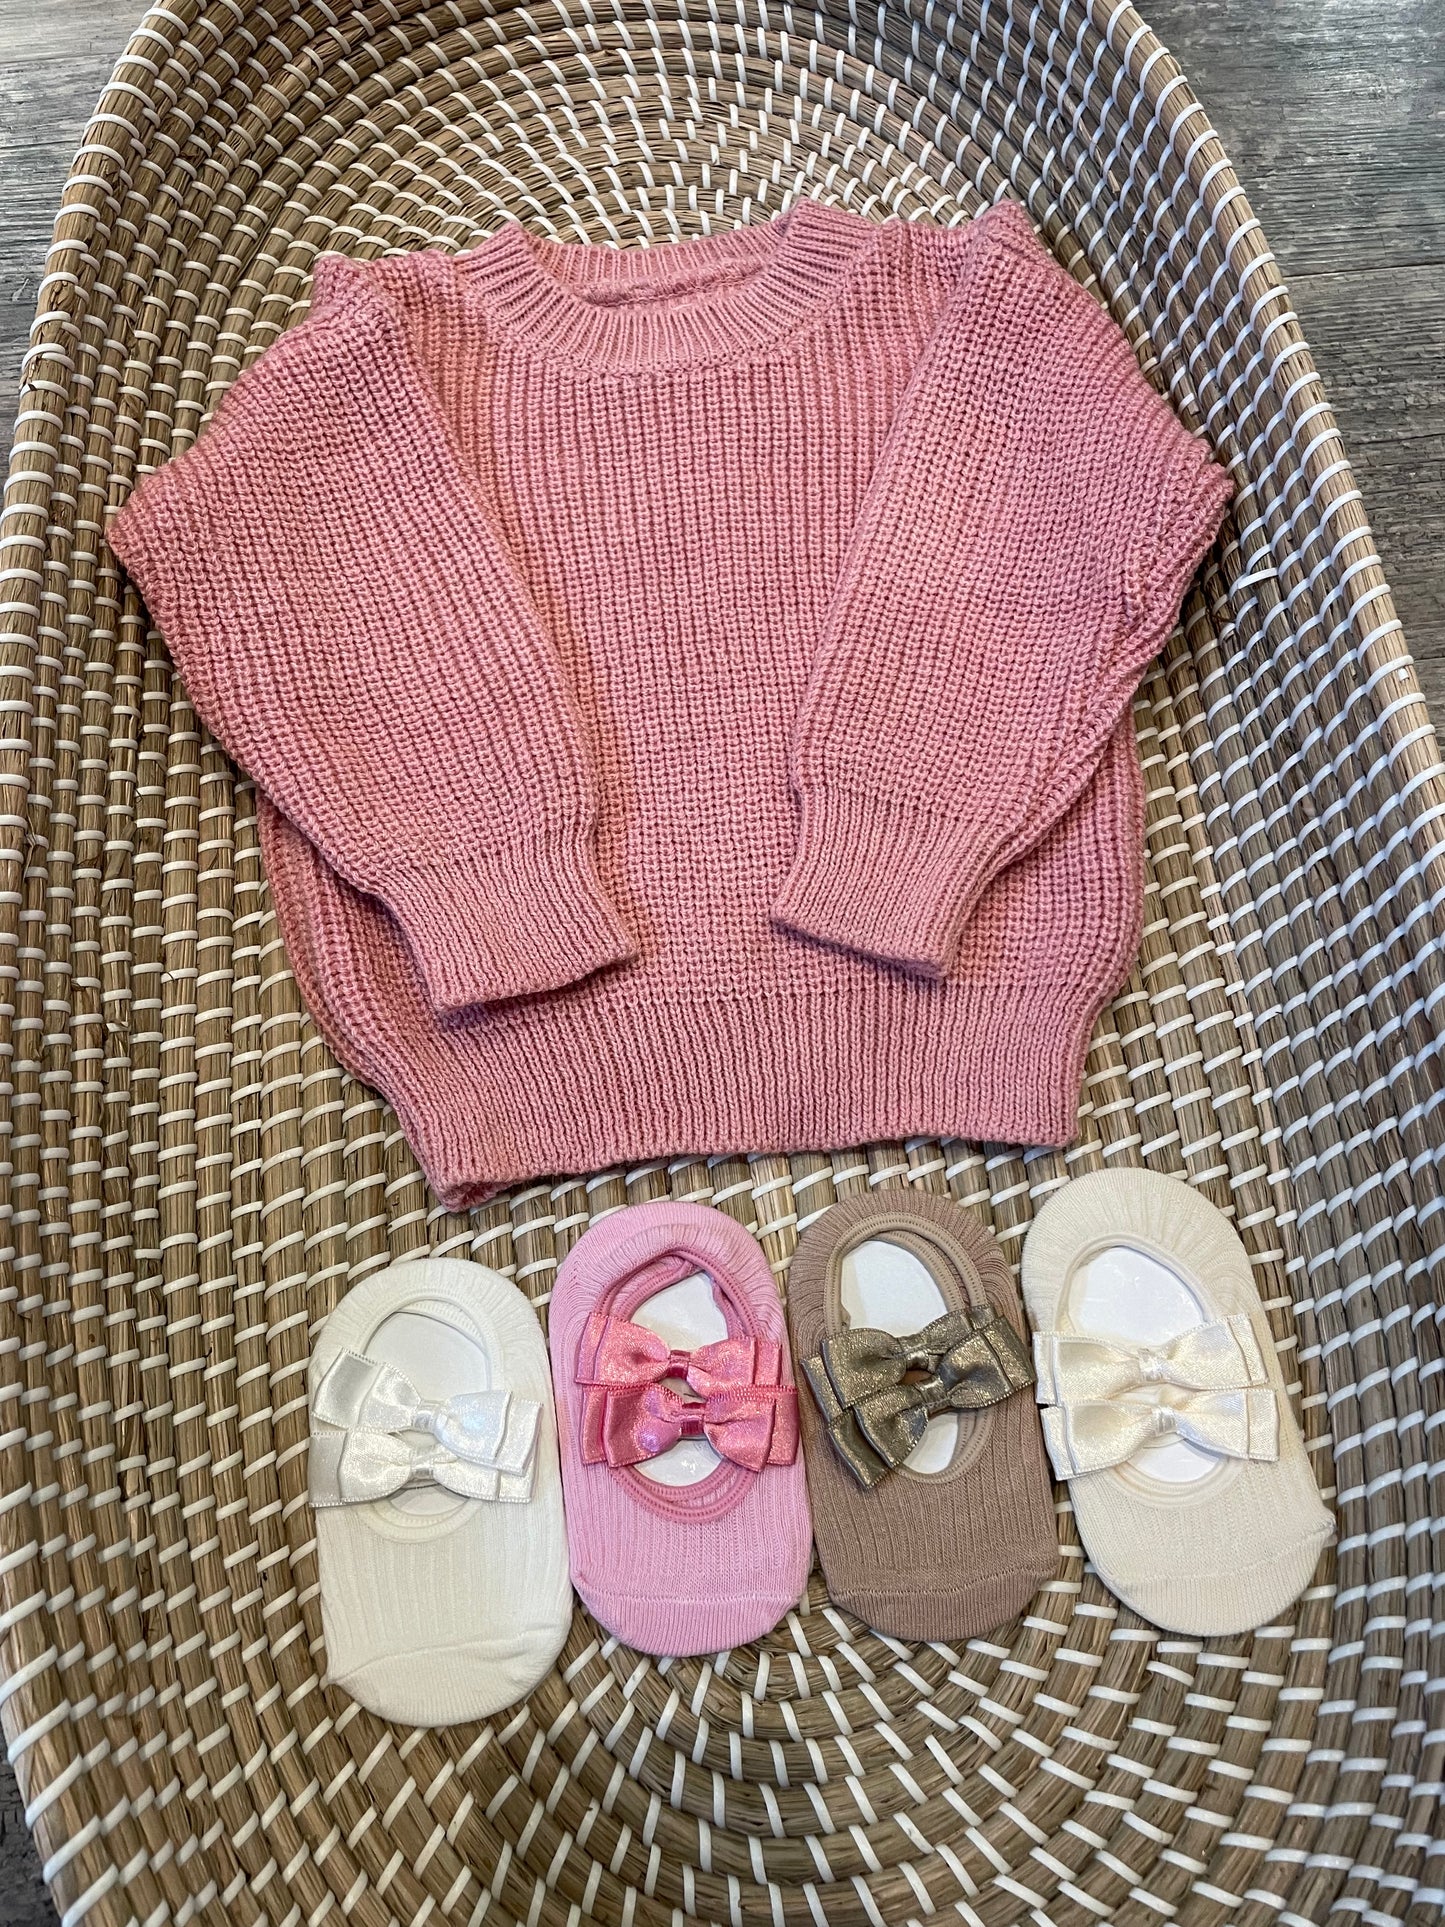 Hand knitted pink jumper